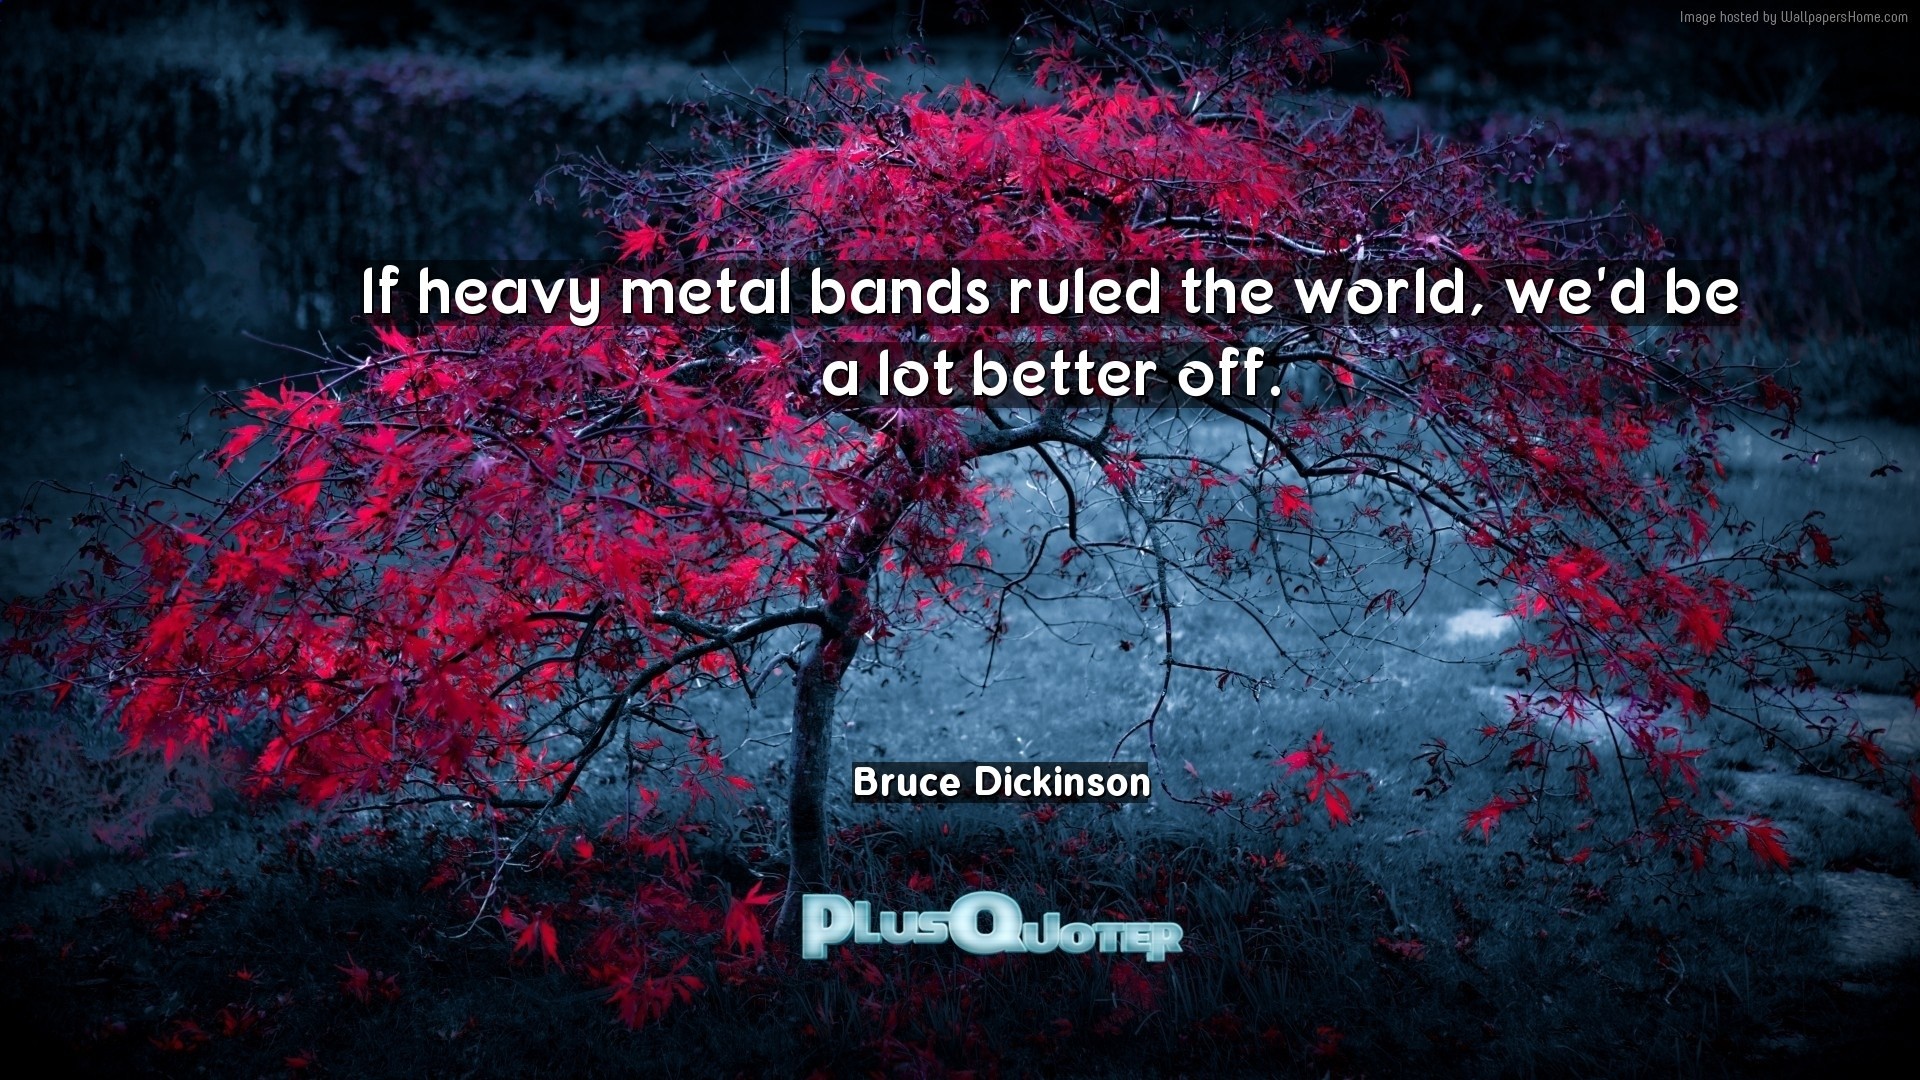 1920x1080 Download Wallpaper with inspirational Quotes- "If heavy metal bands ruled  the world, we